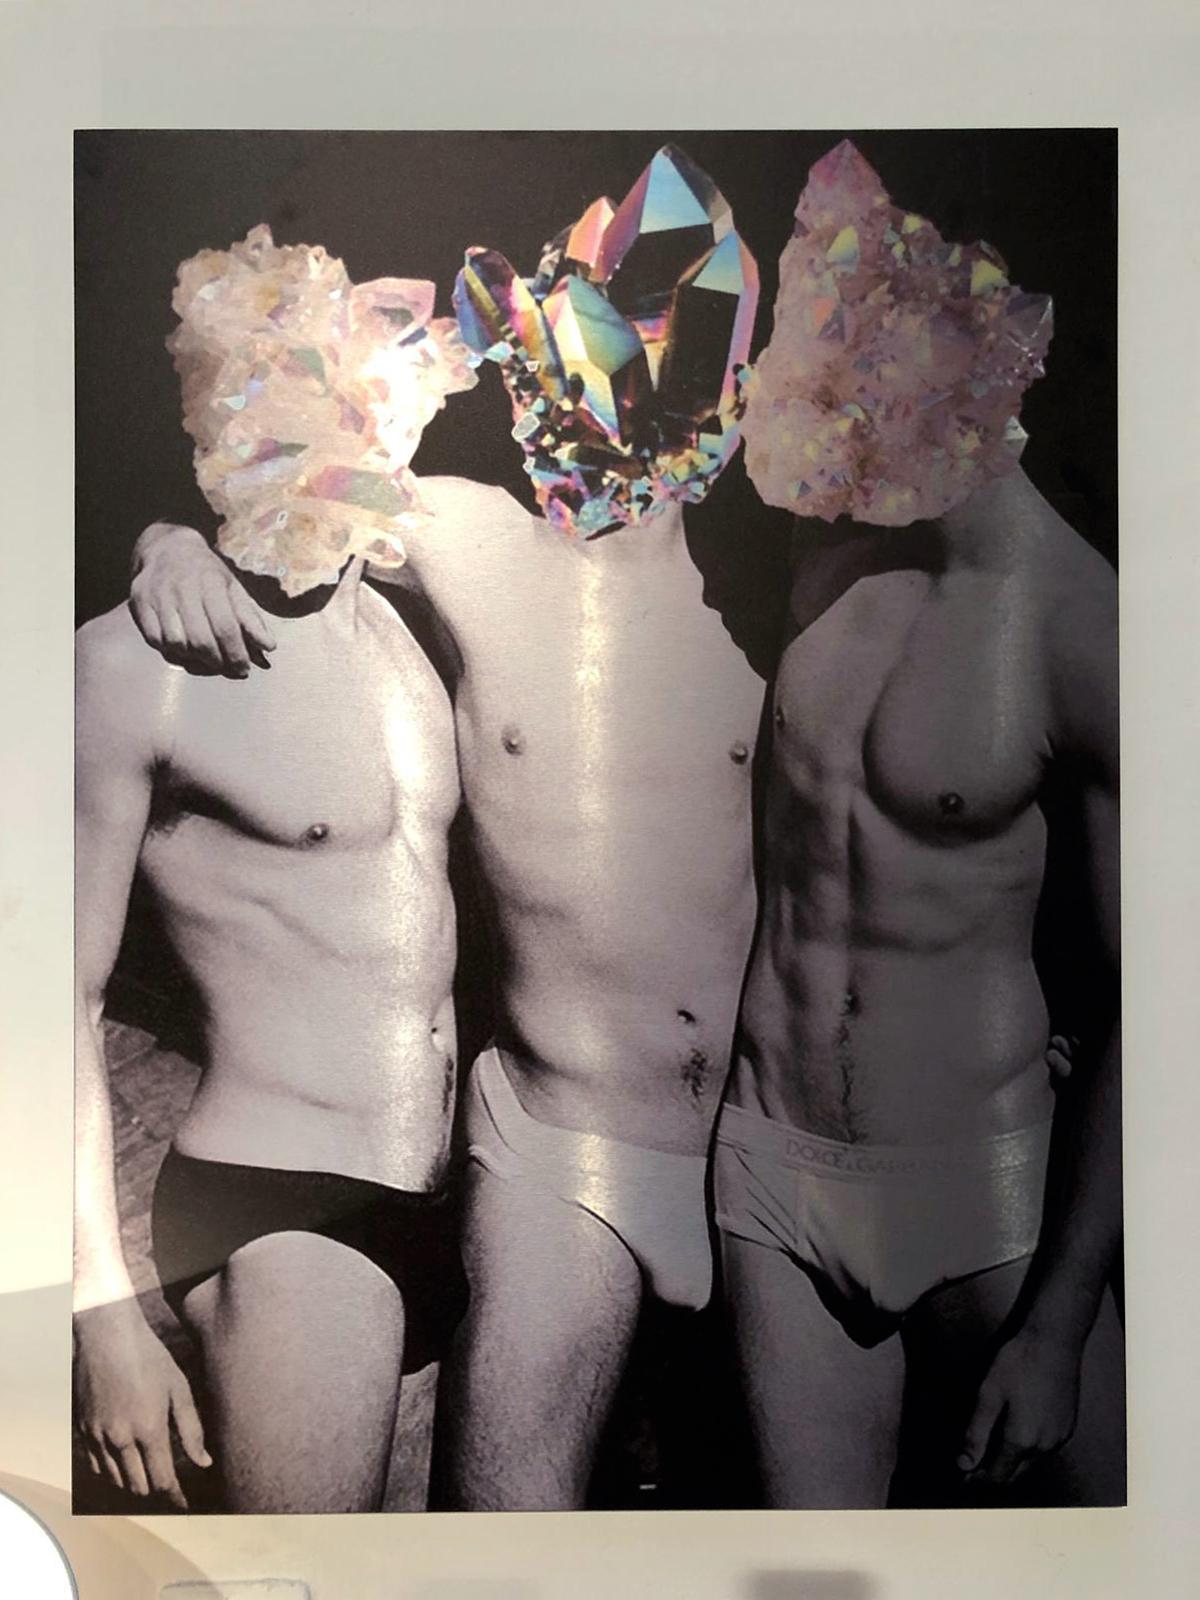 Crystals + boys in underwear digital collage print by Spanish artist Naro Pinosa, made famous in social media. Unique signed-by-artist piece. Authenticity certificated.
Printed on aluminum sheet on metallic frame. Silver finish.